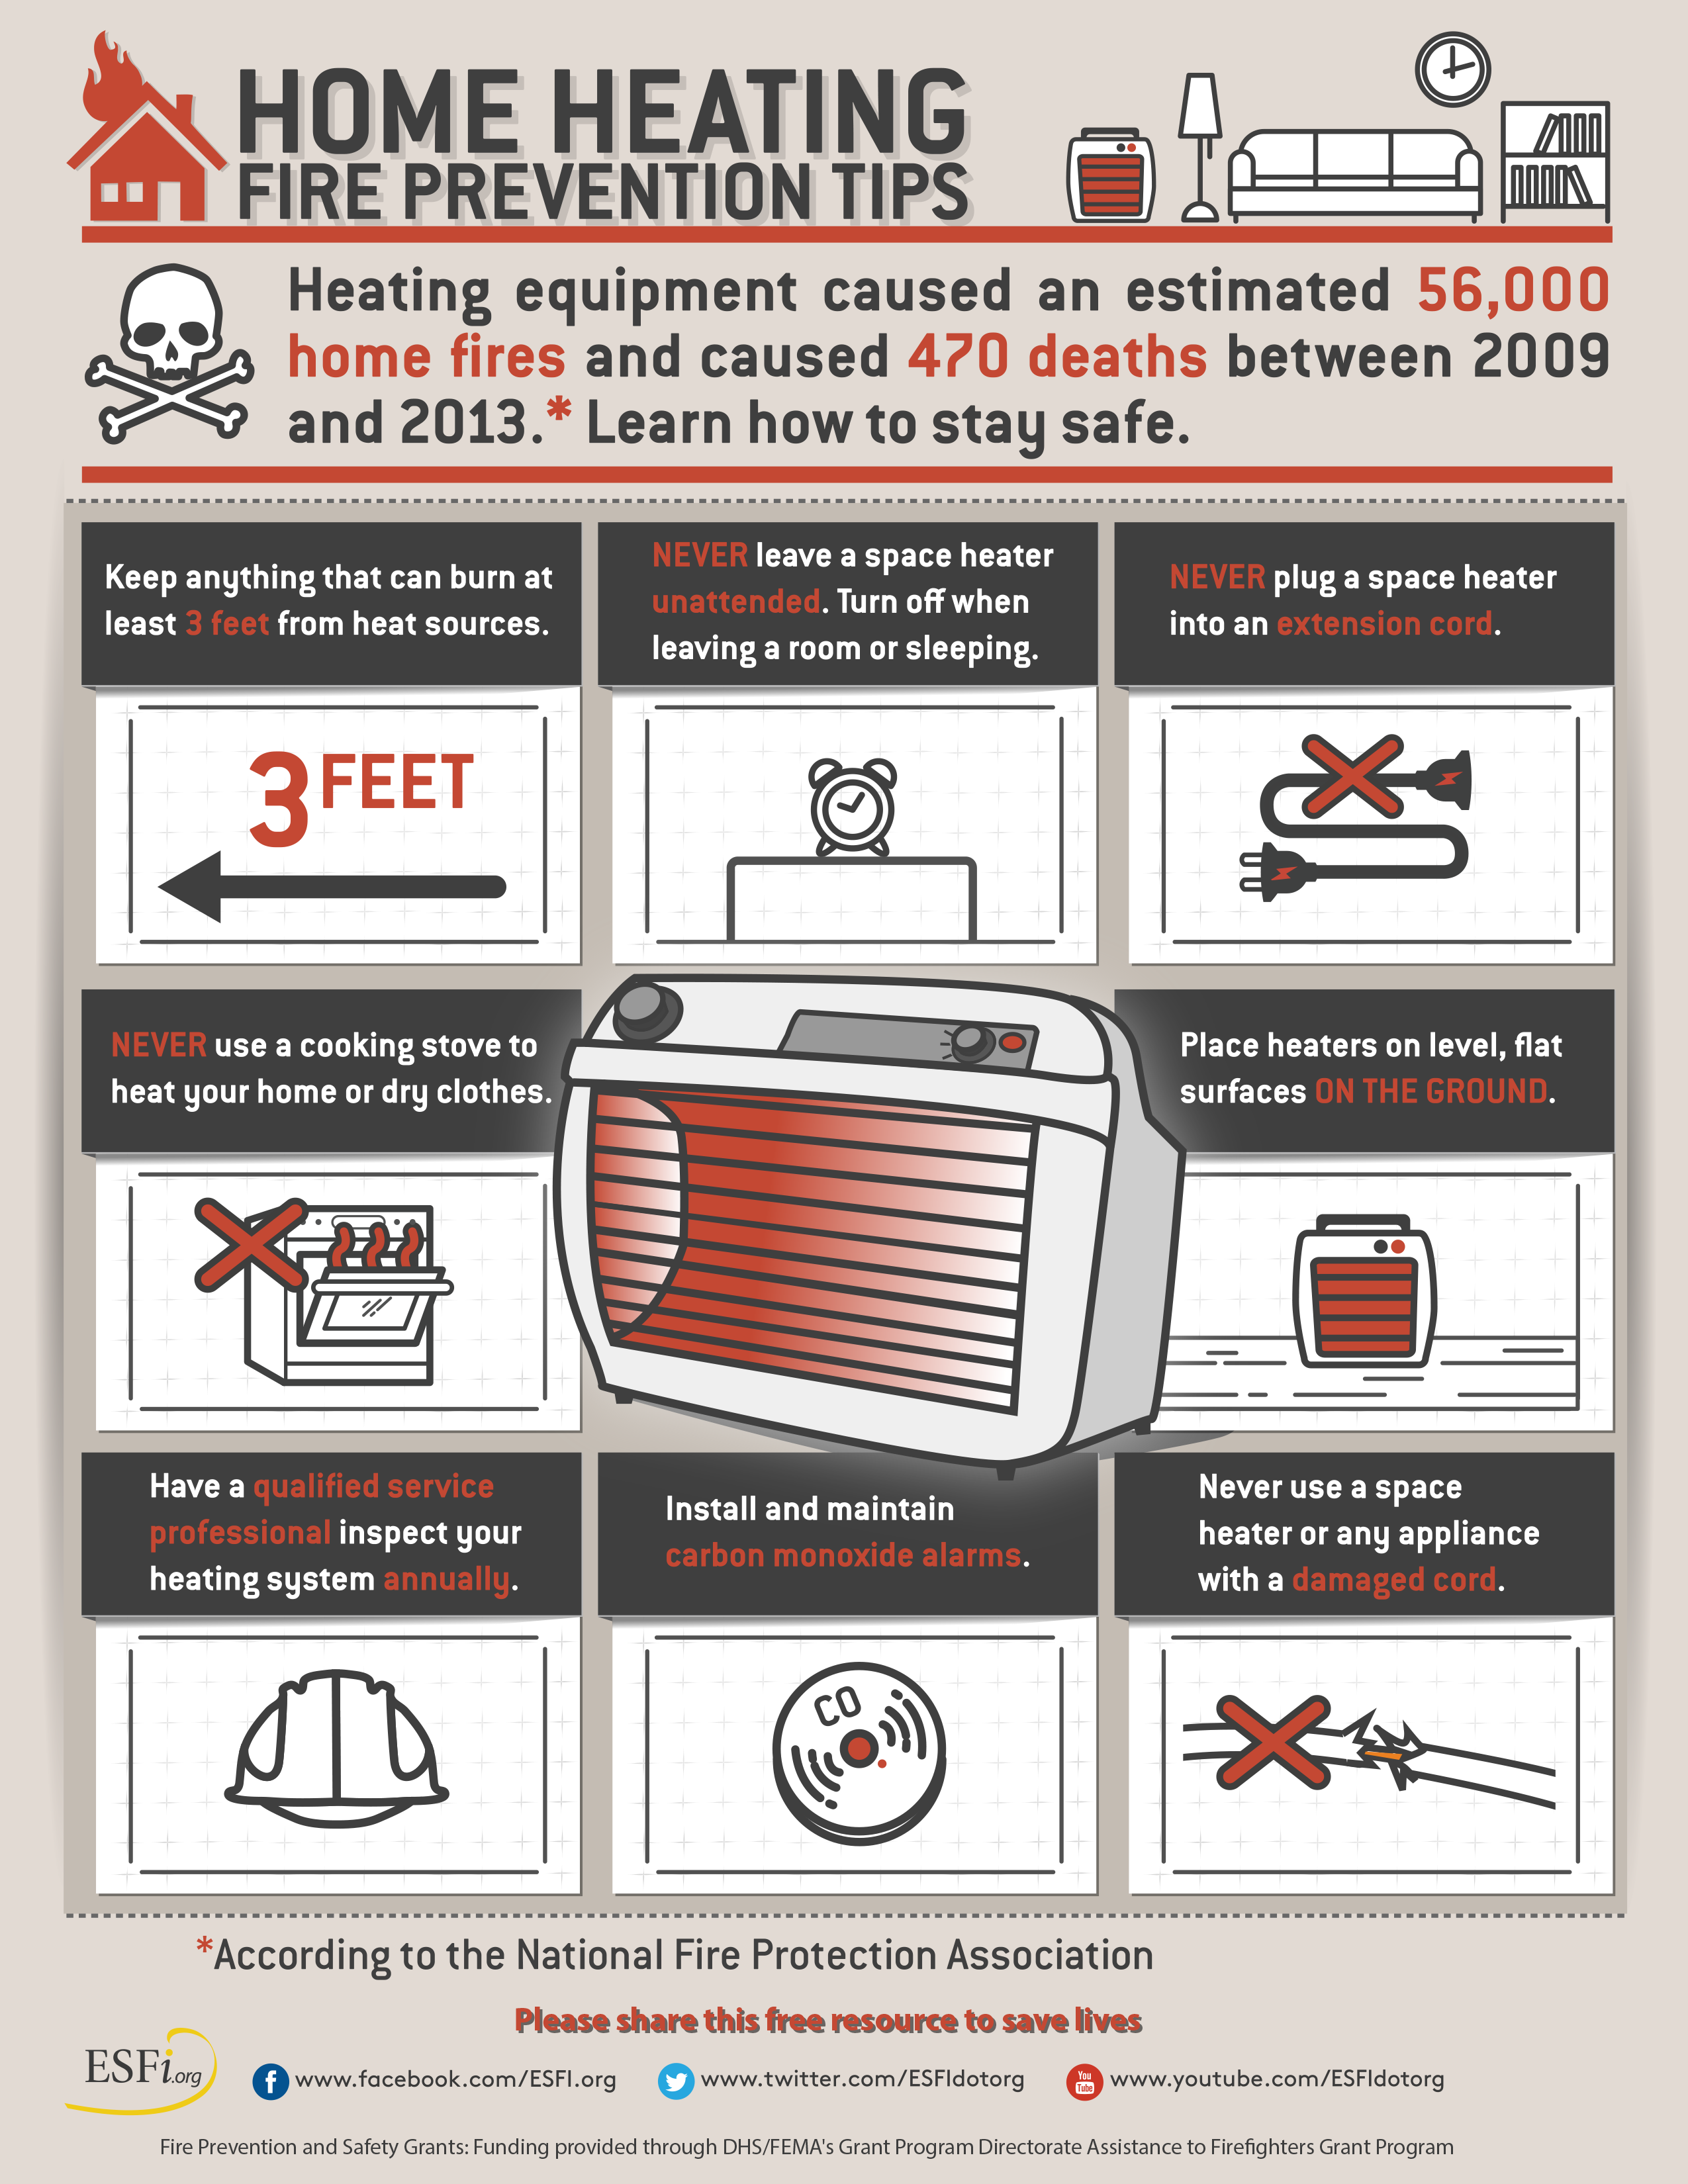 Home heating safety tips